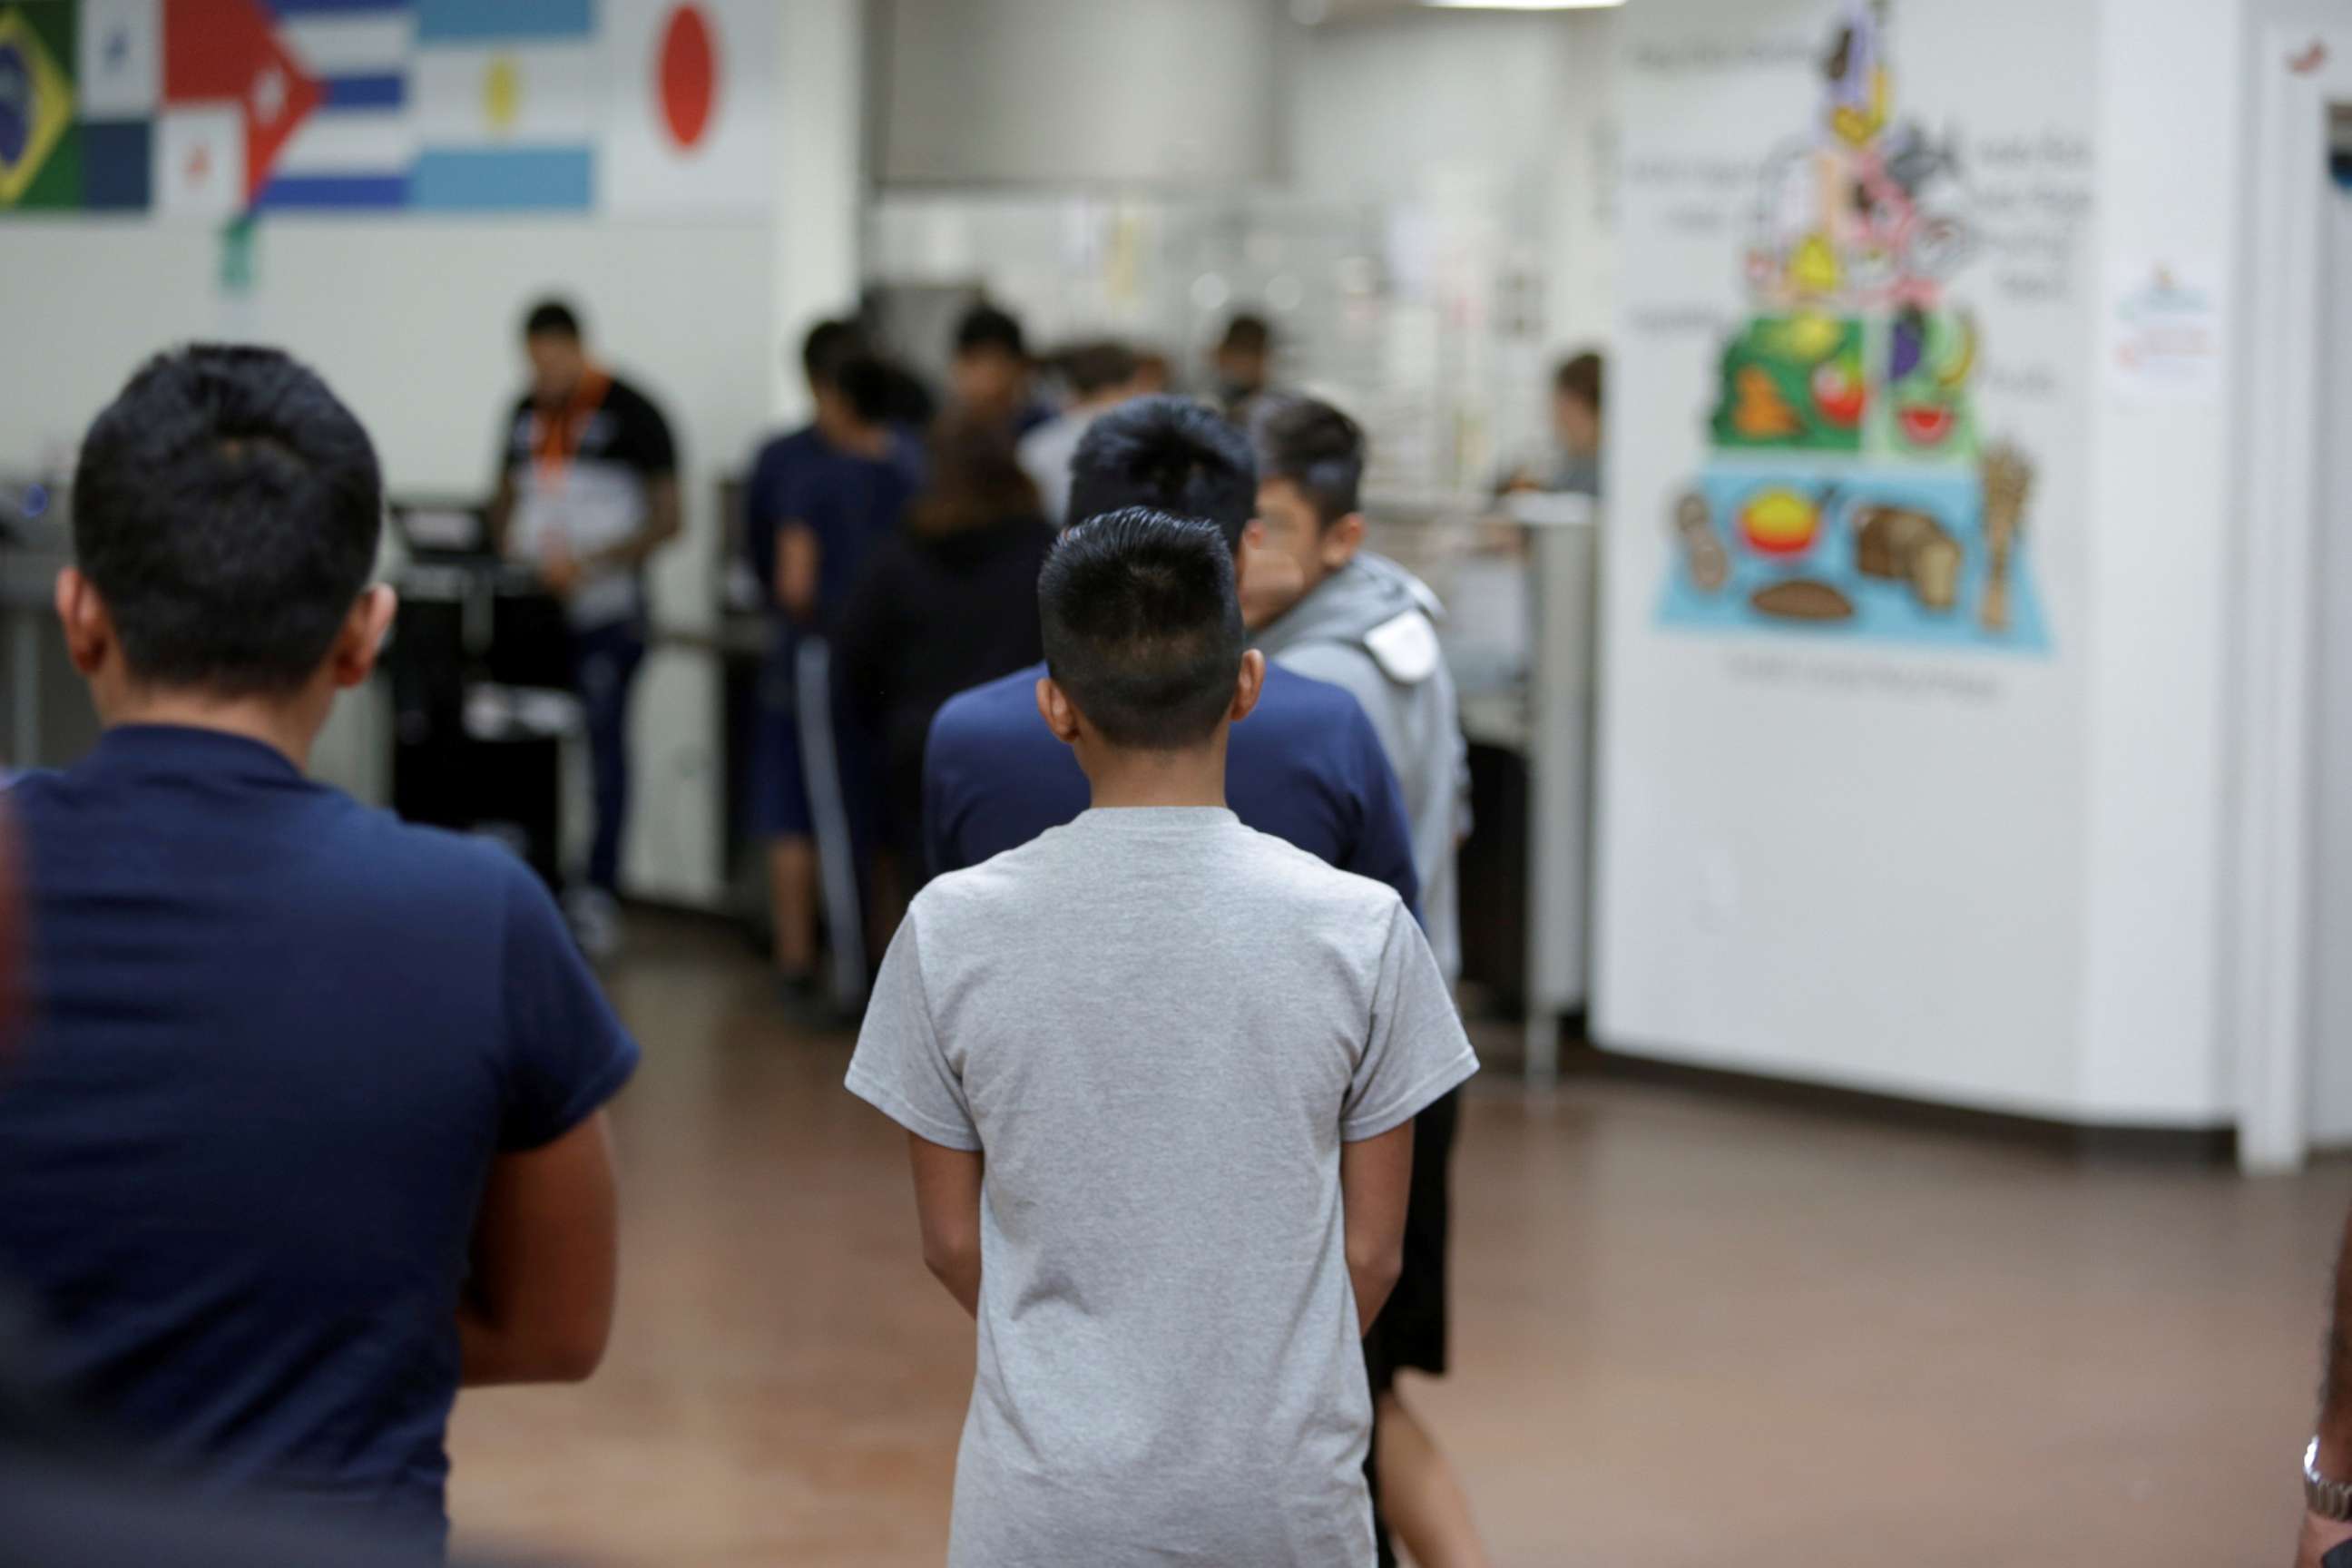 PHOTO: Children stand in line at Casa Padre, an immigrant shelter for unaccompanied minors, in Brownsville, Texas, in a photo released by the Department of Health and Human Services, June 14, 2018.